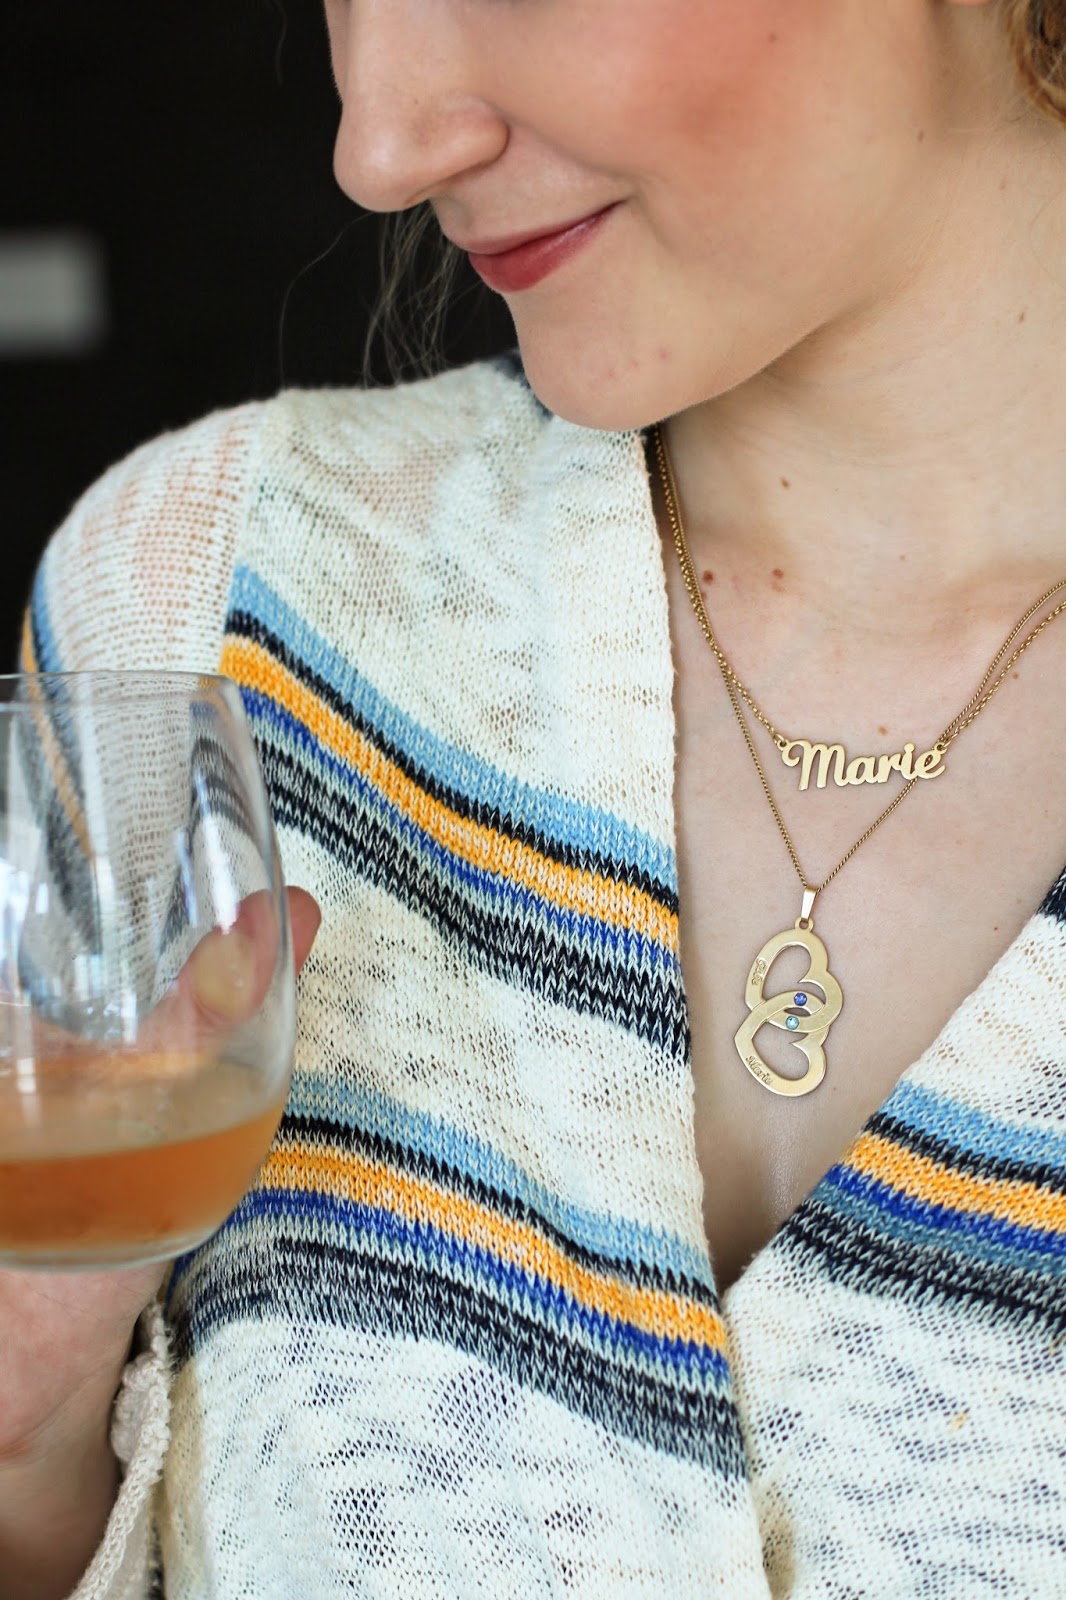 These personalized gifts from Onecklace are the perfect Holiday gift!